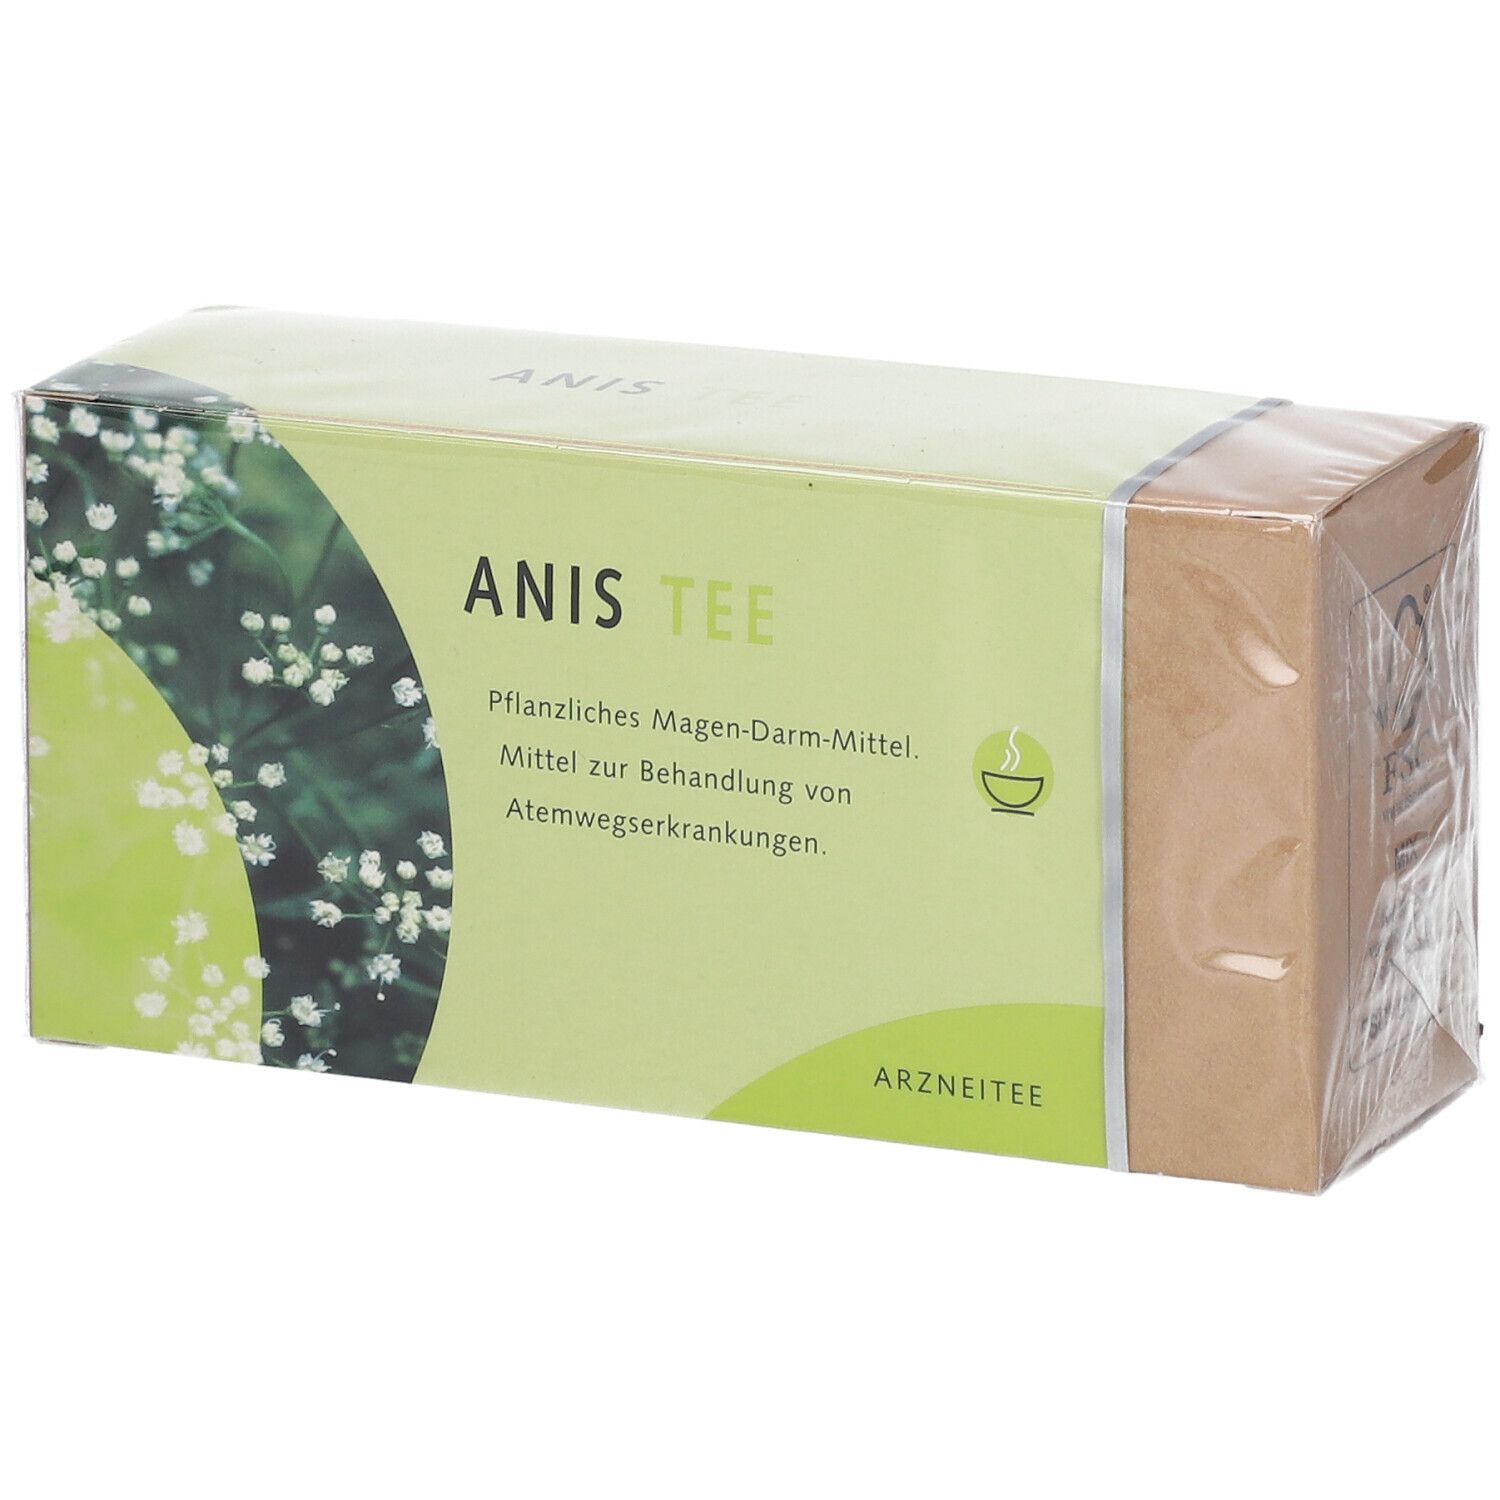 Anistee filter bag